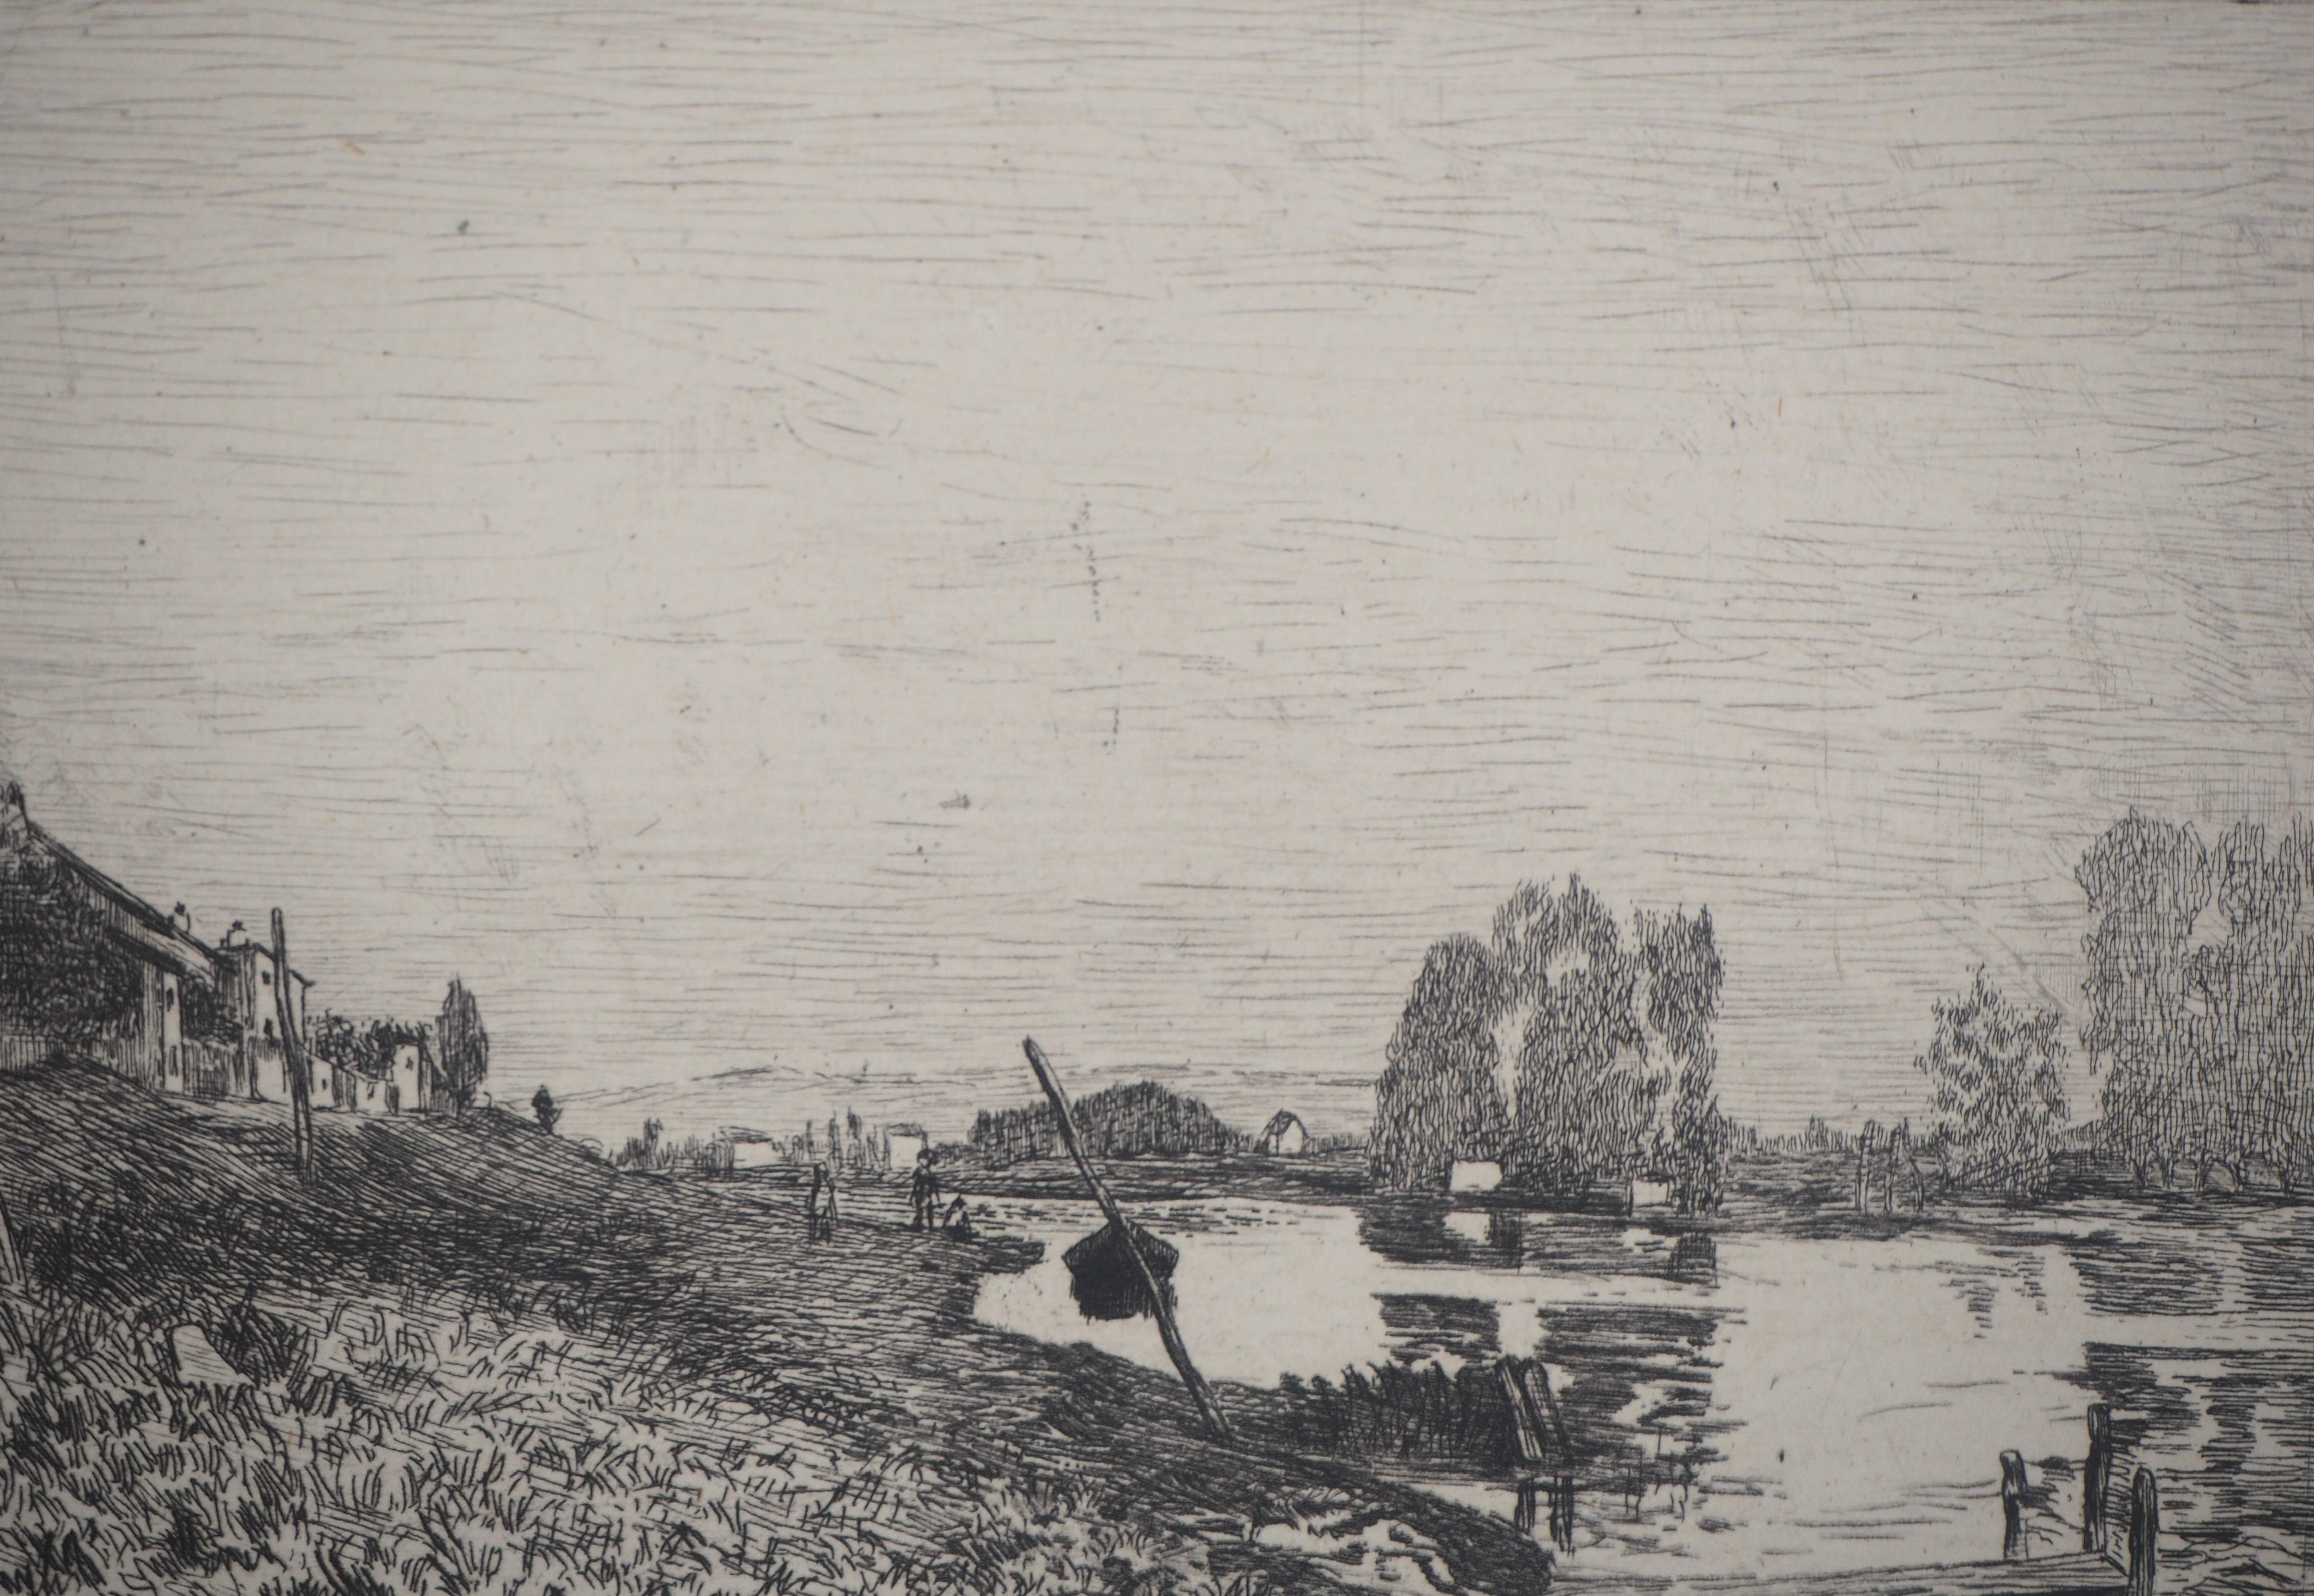 River in Normandy - Original etching - Ed. Durand Ruel, 1873 - Impressionist Print by Alfred Sisley